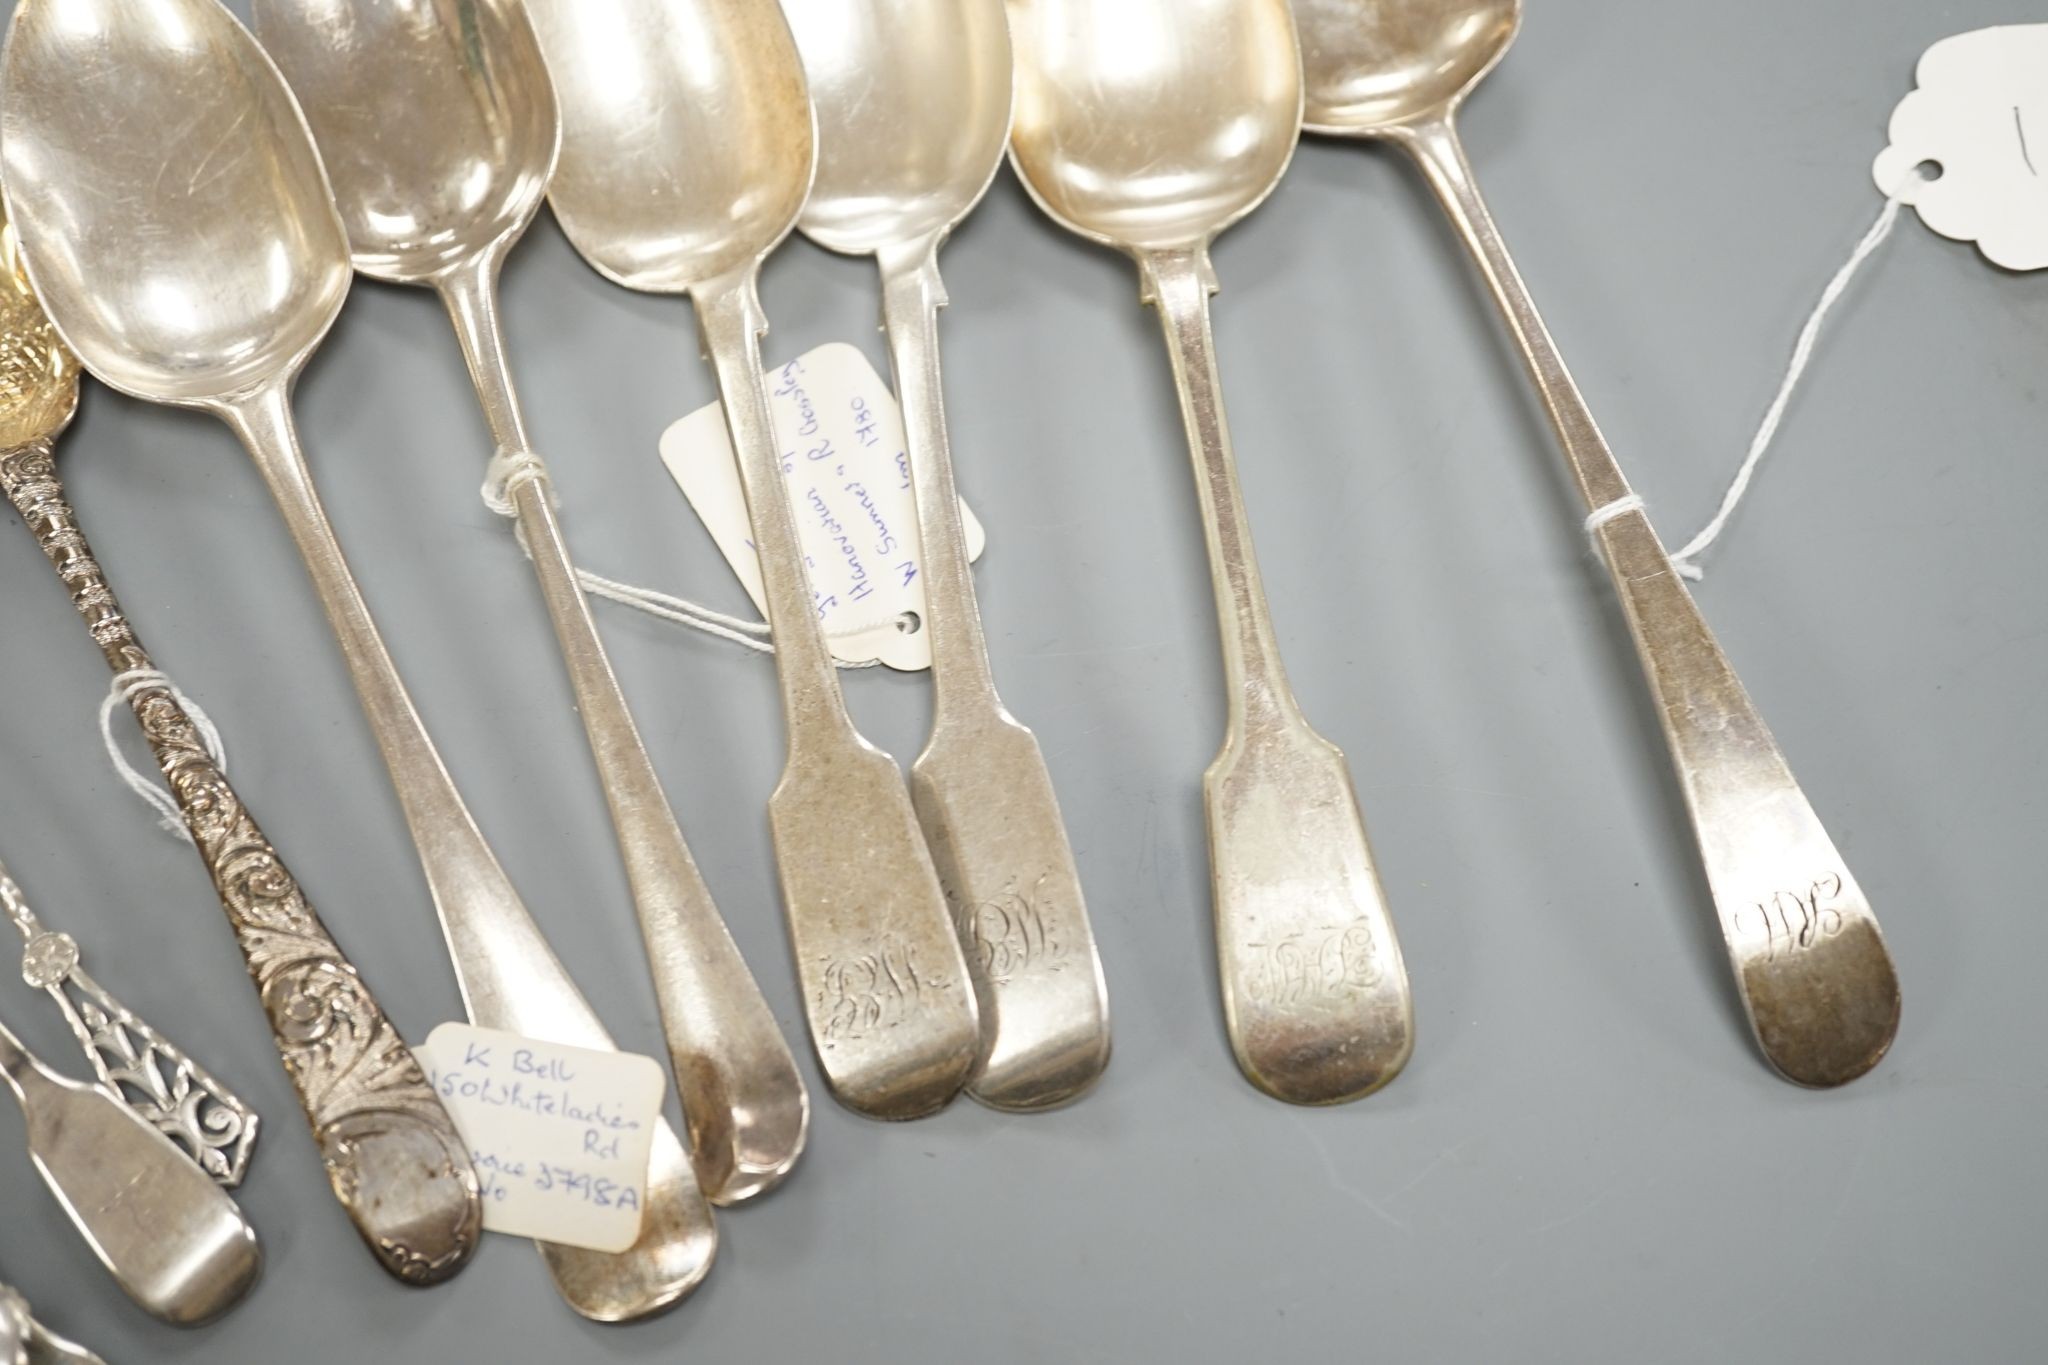 A small collection of 18th century and later silver flatware, including a table spoon by Thomas Eustace, Exeter, 1785, two 18th century silver lace back dessert spoons, an 18th century 'berry' spoon, a George III silver